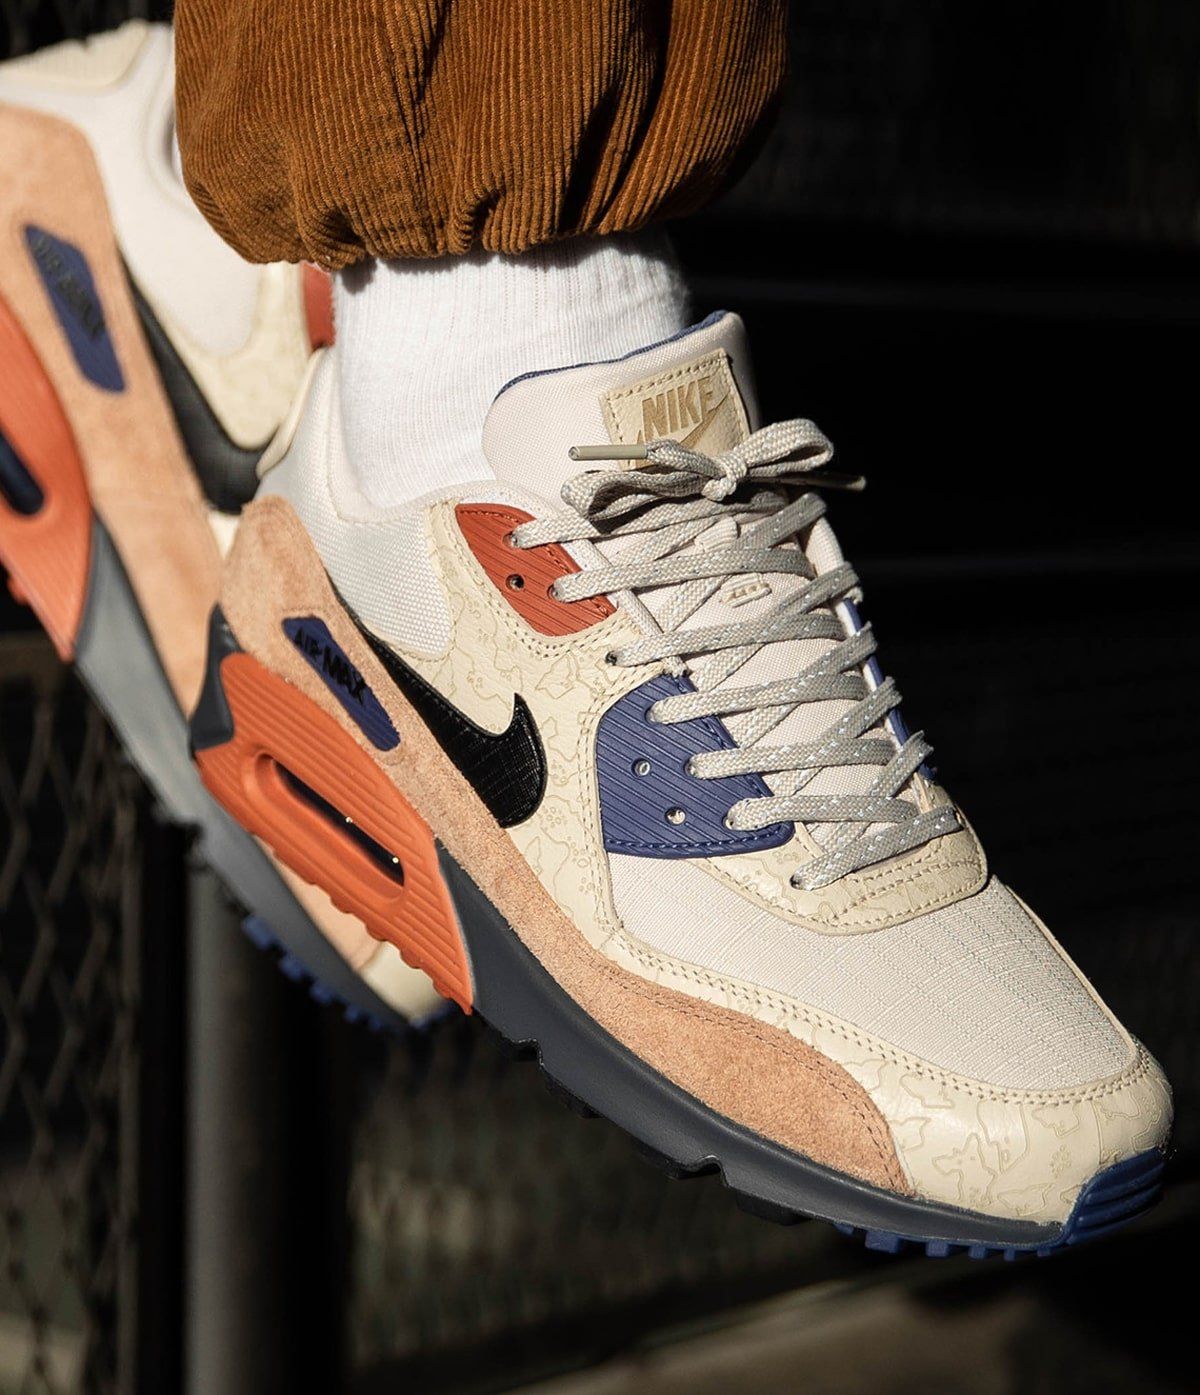 Where to Buy the Nike Air Max 90 NRG “Camowabb” | HOUSE OF HEAT